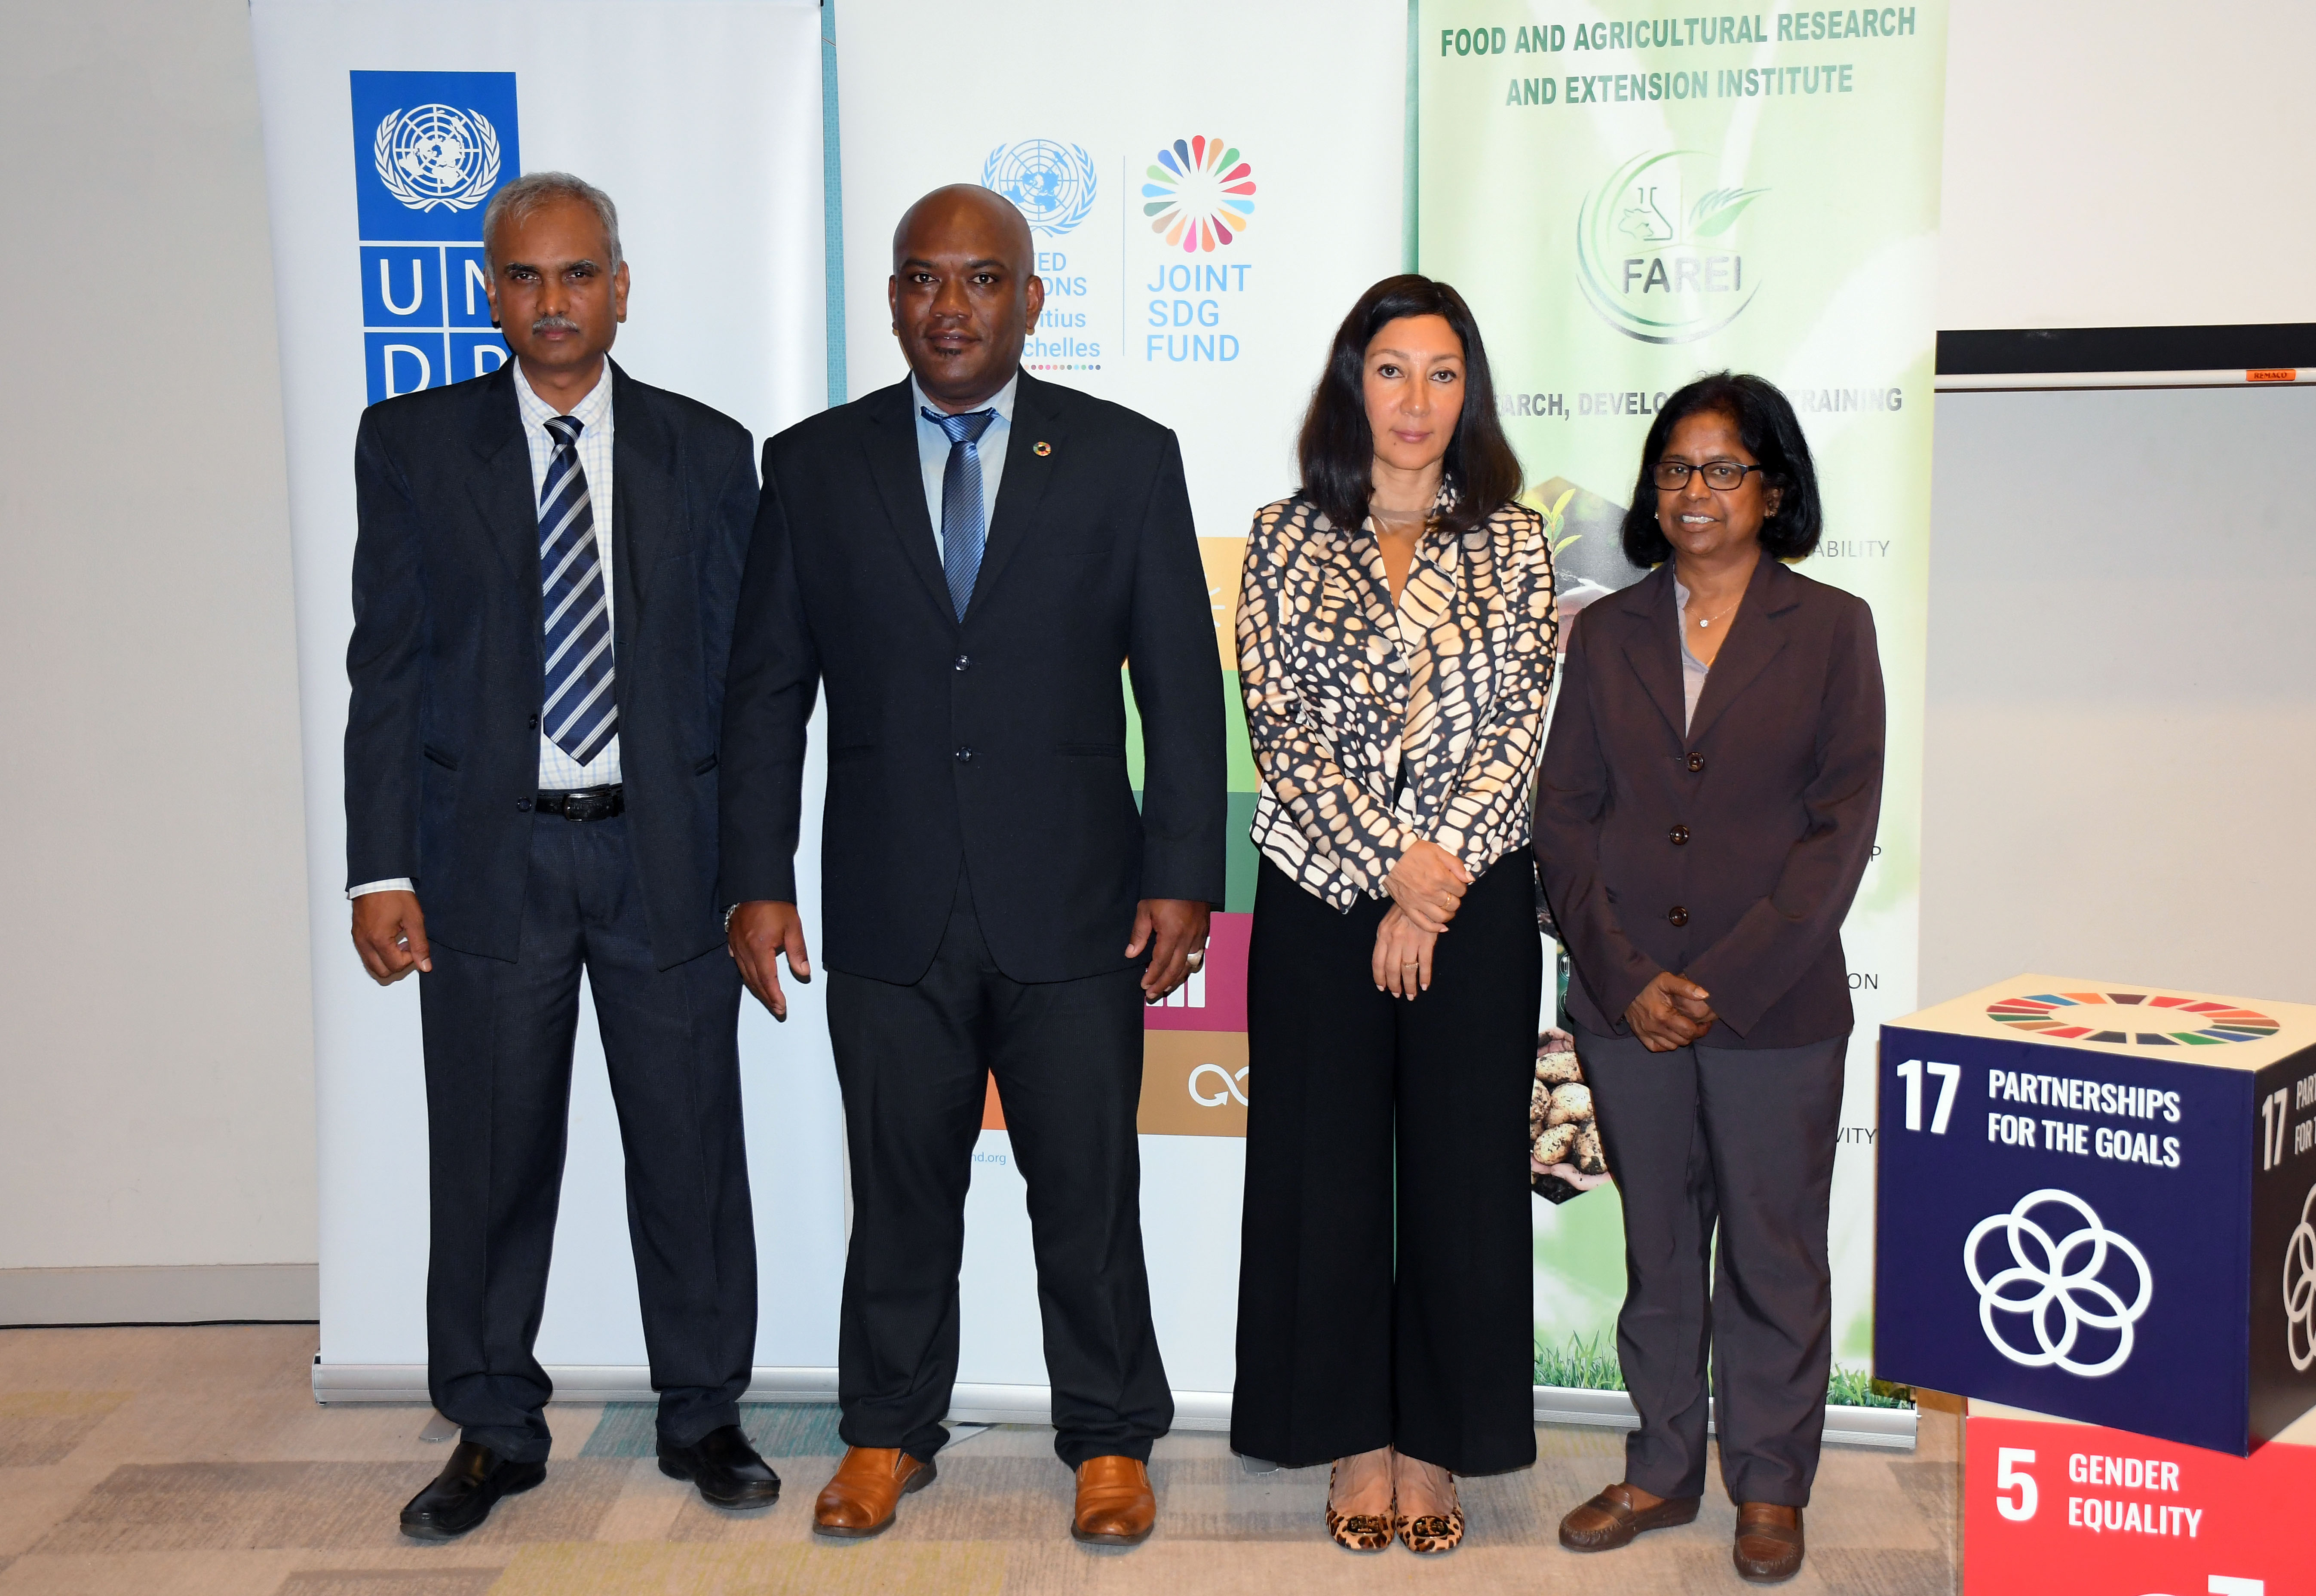 Dr. P. Sookar, Assistant Director, Agricultural Services and officer-in Charge; Mr Jean-Lindsay Azie, UNDP Environment Unit Team Leader; Her Excellency Ms. Lisa Singh, United Nations Resident Coordinator for Mauritius and Seychelles, an Mrs. M. Seenavassen Pillay, acting Chief Executive Officer of FAREI 